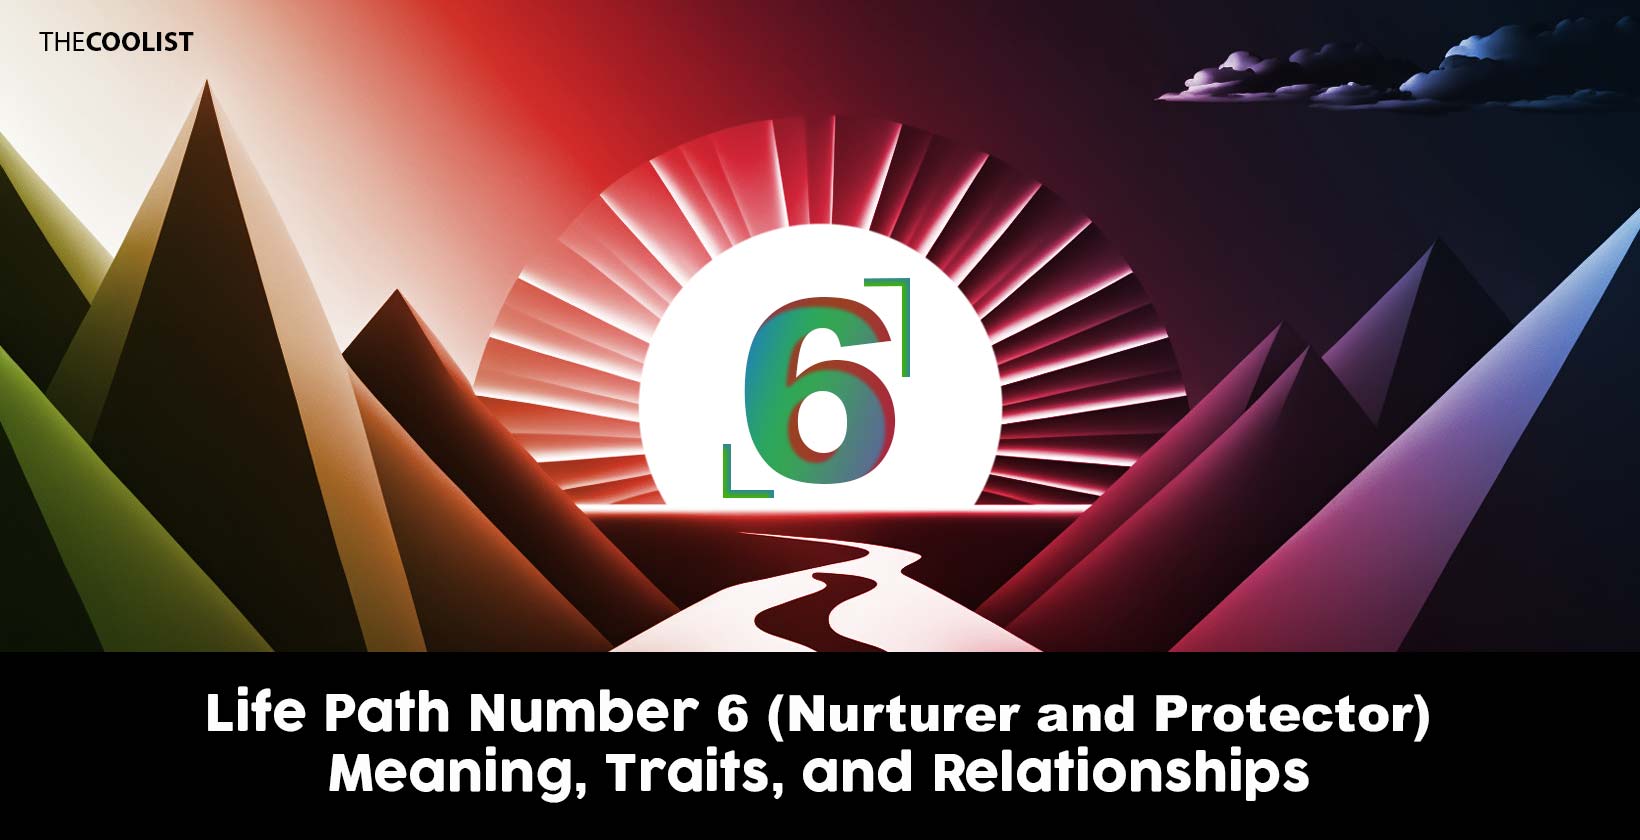 Life Path Number 6 (Nurturer and Protector) Meaning, Traits, and Relationships